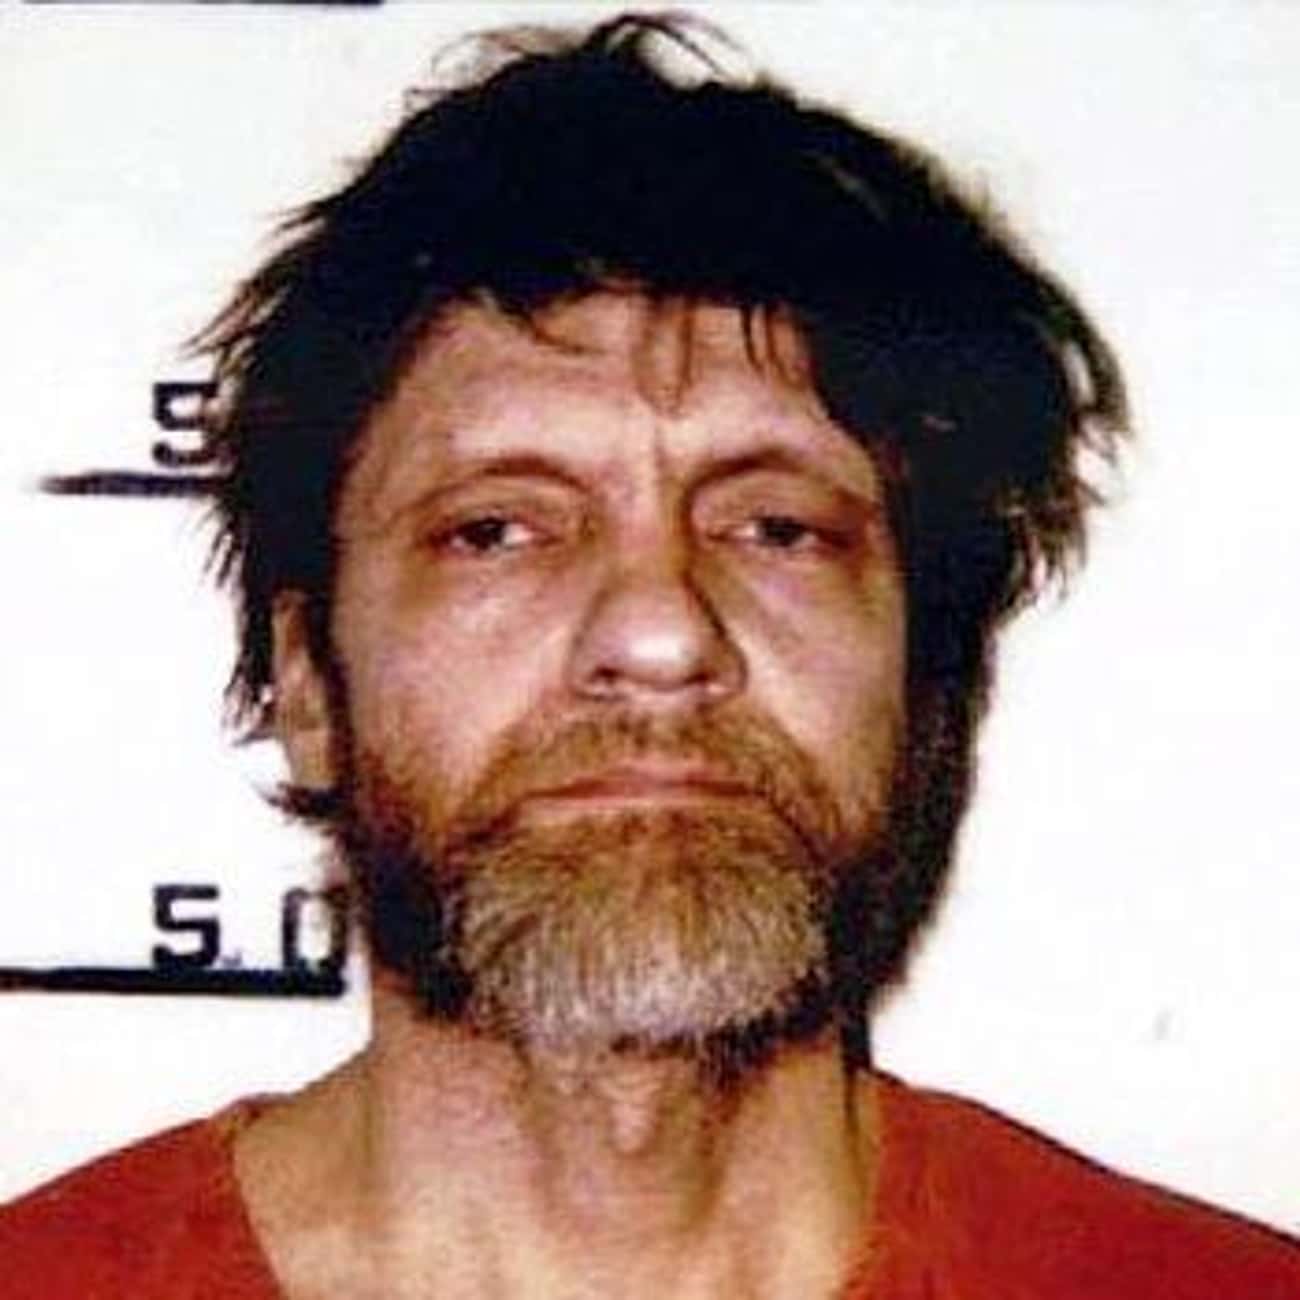 The Unabomber Went To Harvard At Age 16